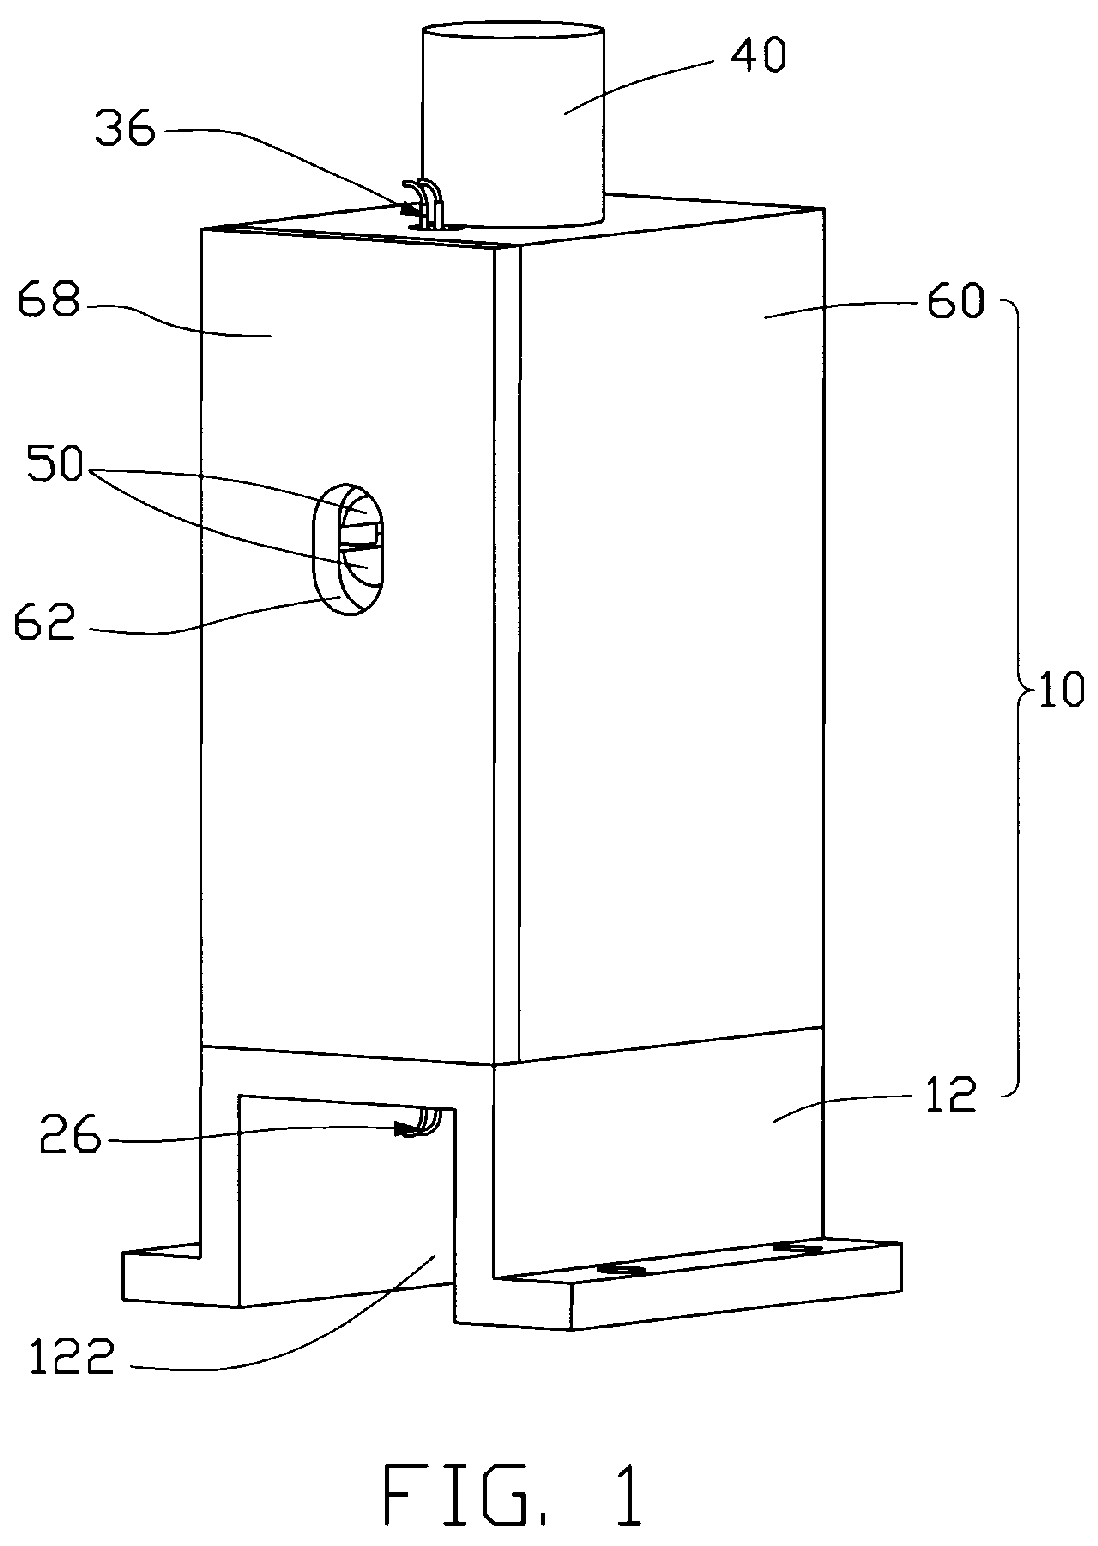 Performance testing apparatus for heat pipes